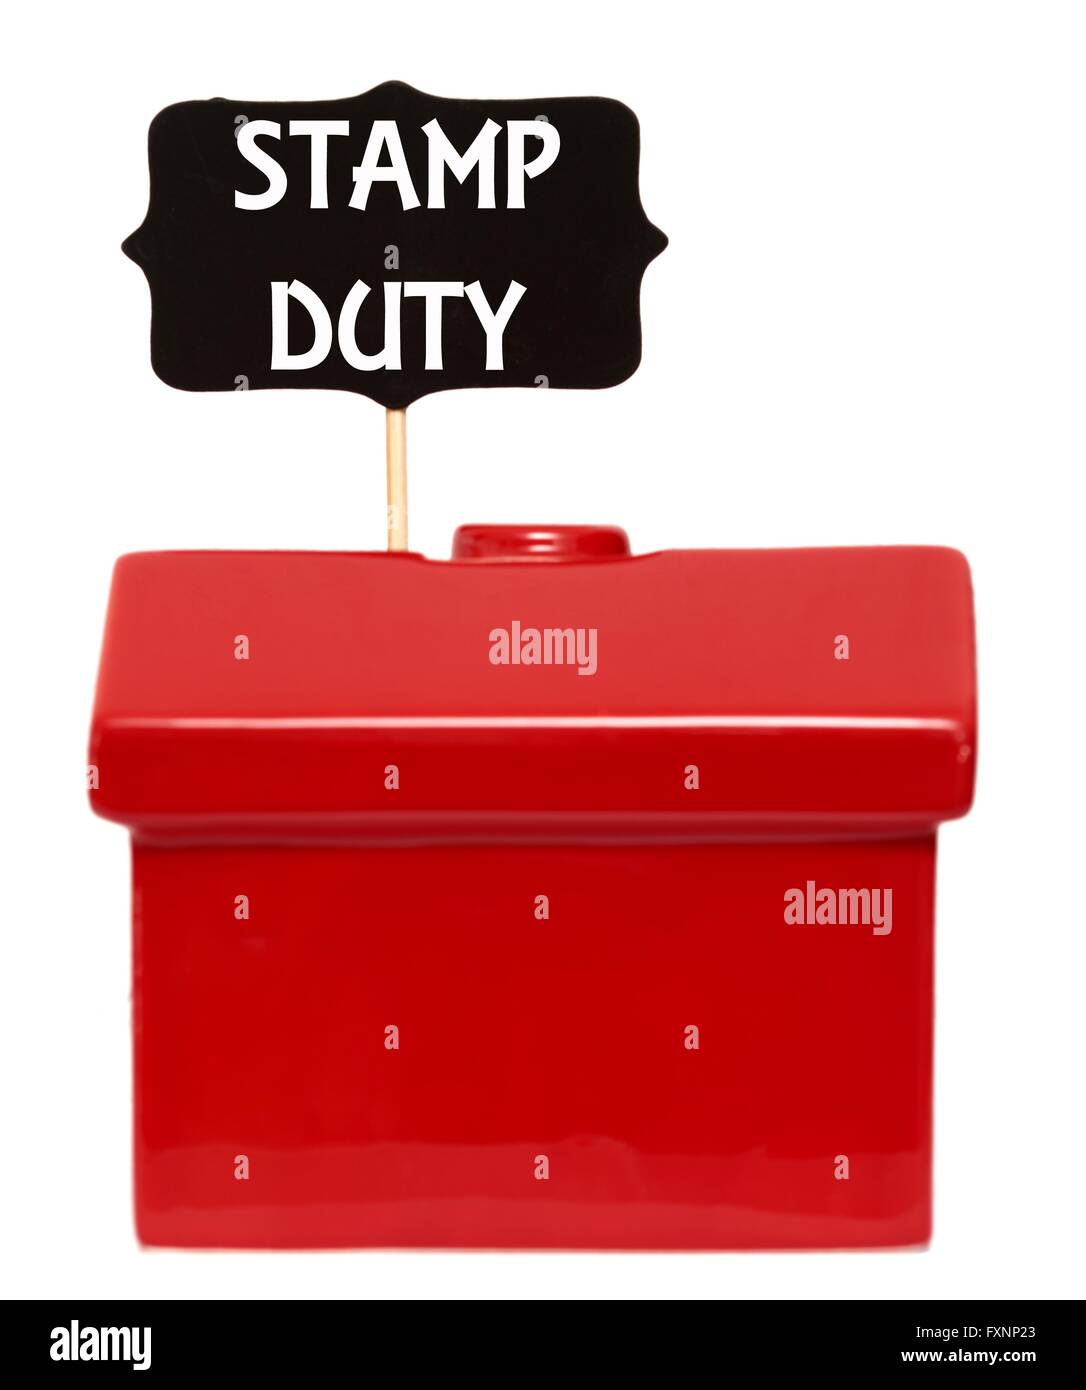 Red house with stamp duty sign concept Stock Photo